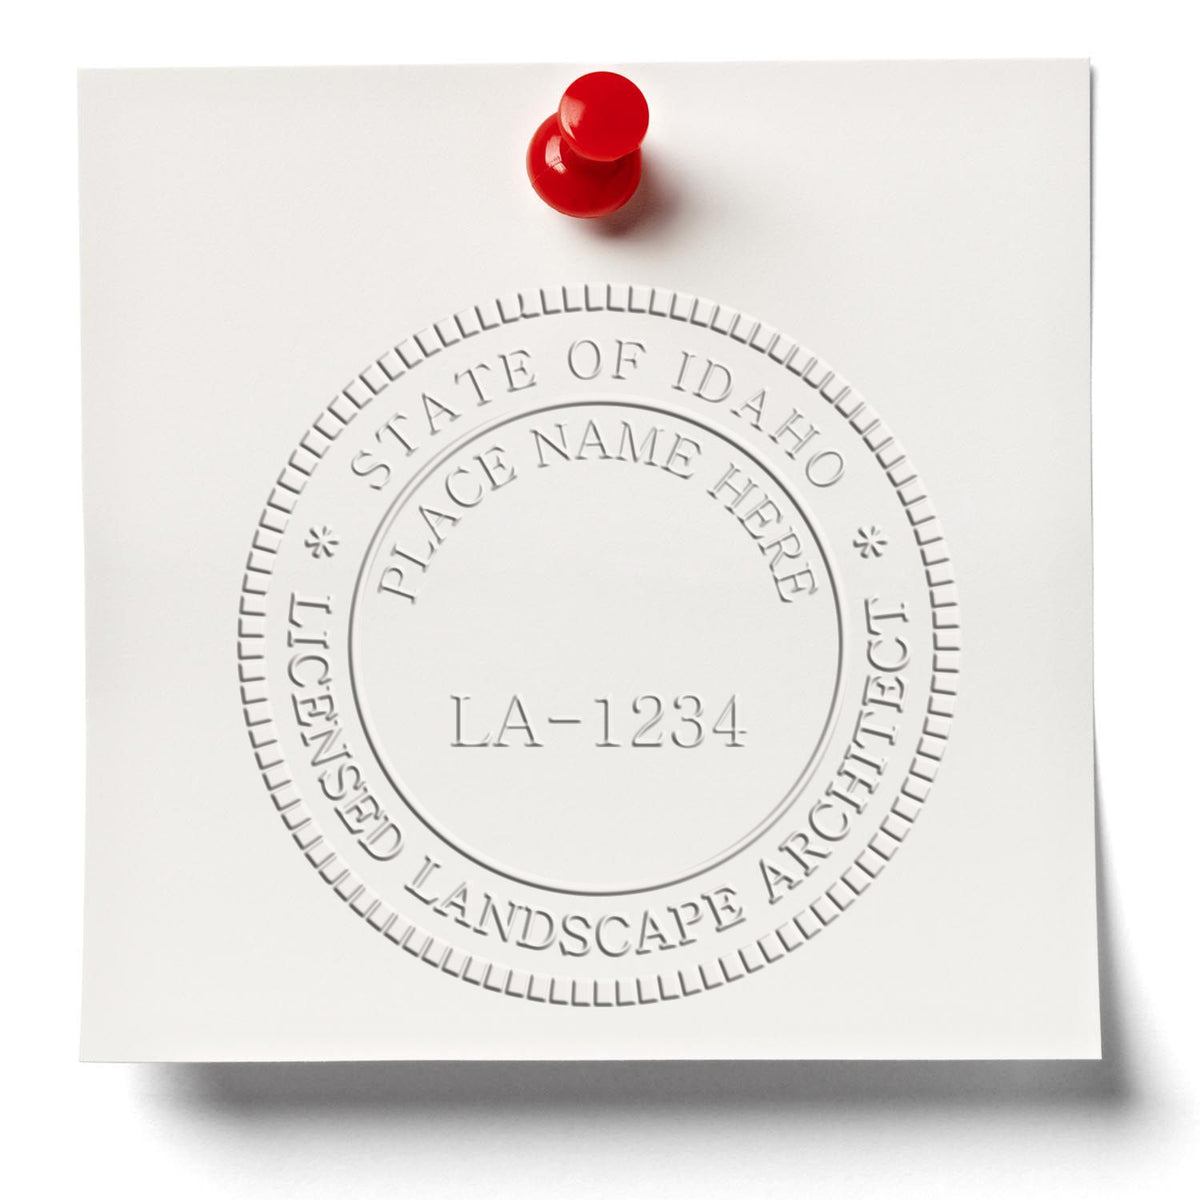 A stamped imprint of the Gift Idaho Landscape Architect Seal in this stylish lifestyle photo, setting the tone for a unique and personalized product.